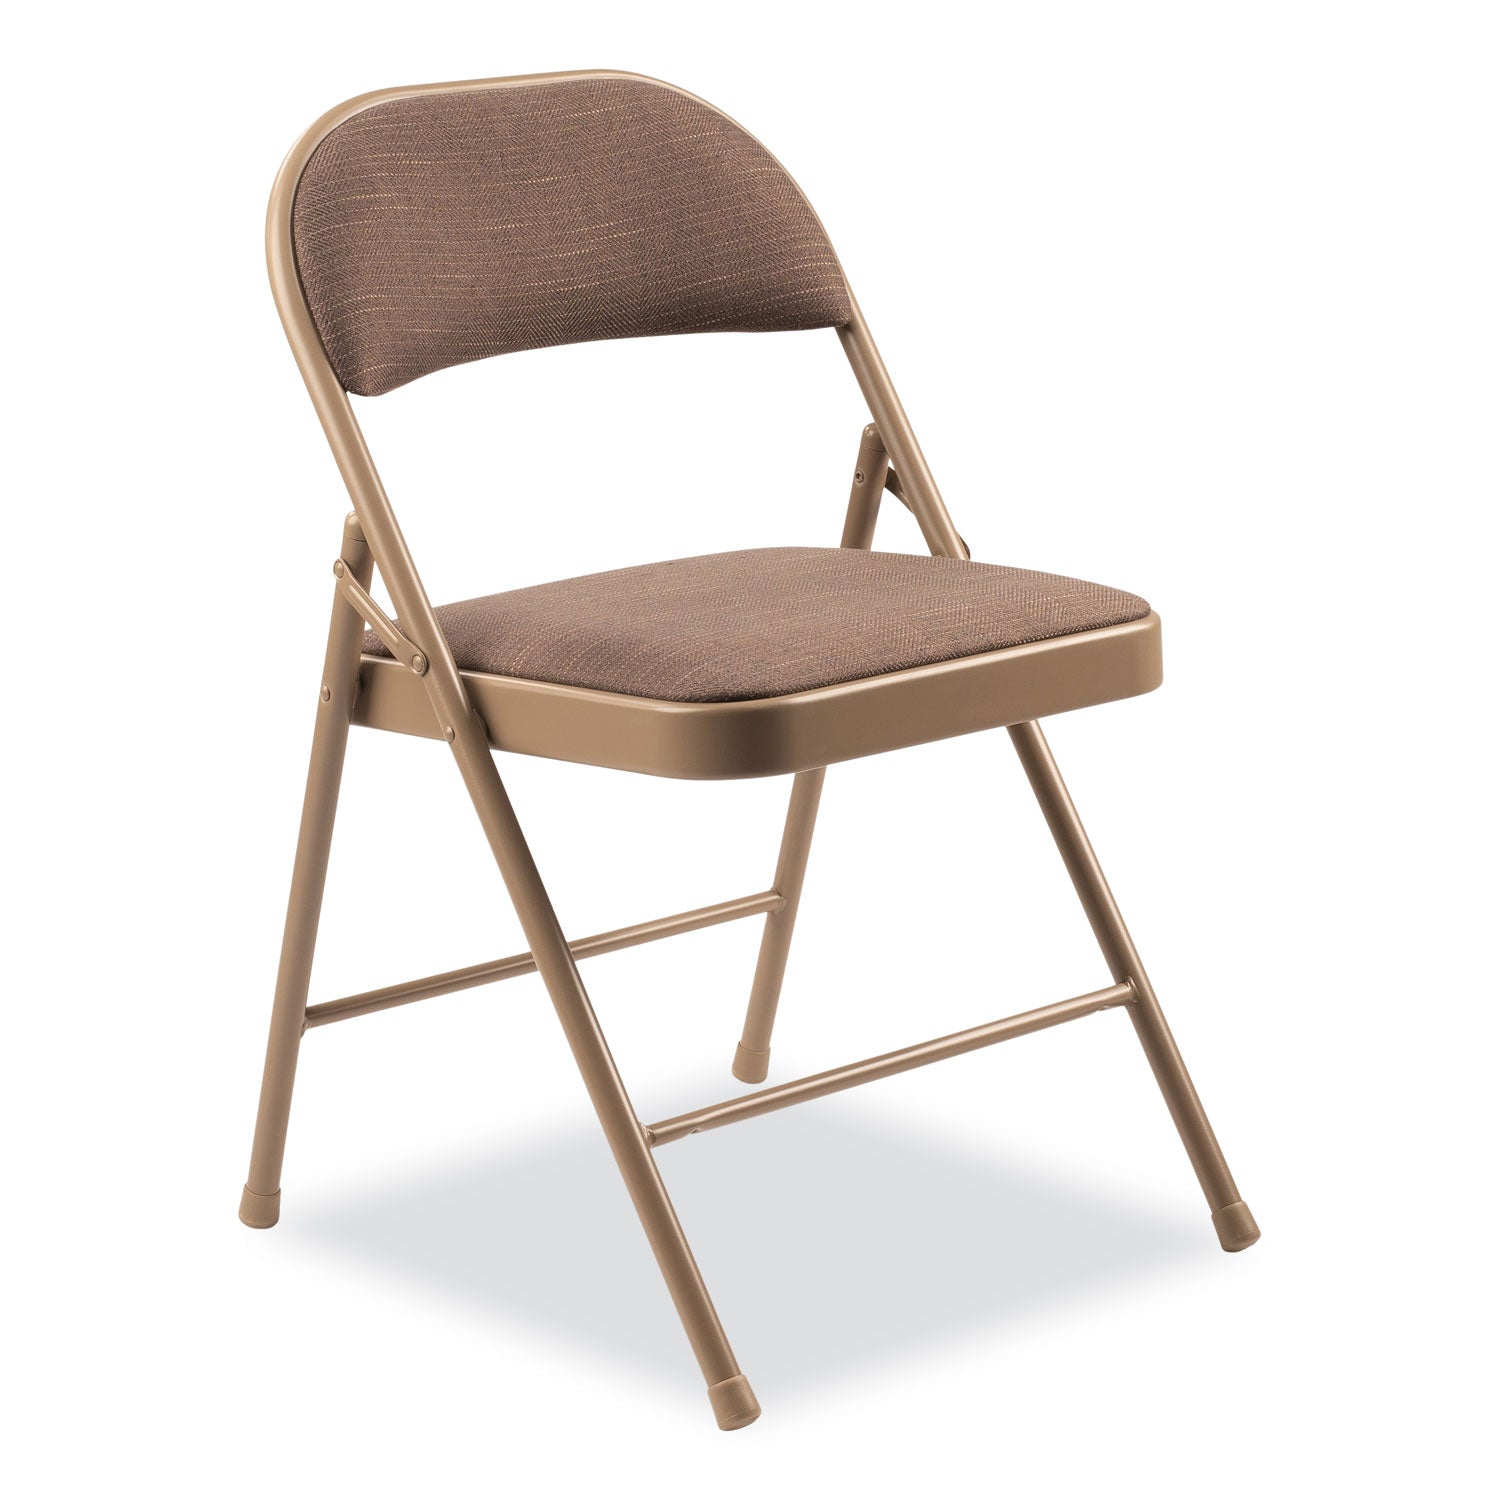 970-series-fabric-padded-steel-folding-chair-supports-250-lb-1775-seat-ht-star-trail-brown-4-ct-ships-in-1-3-bus-days_nps973 - 2